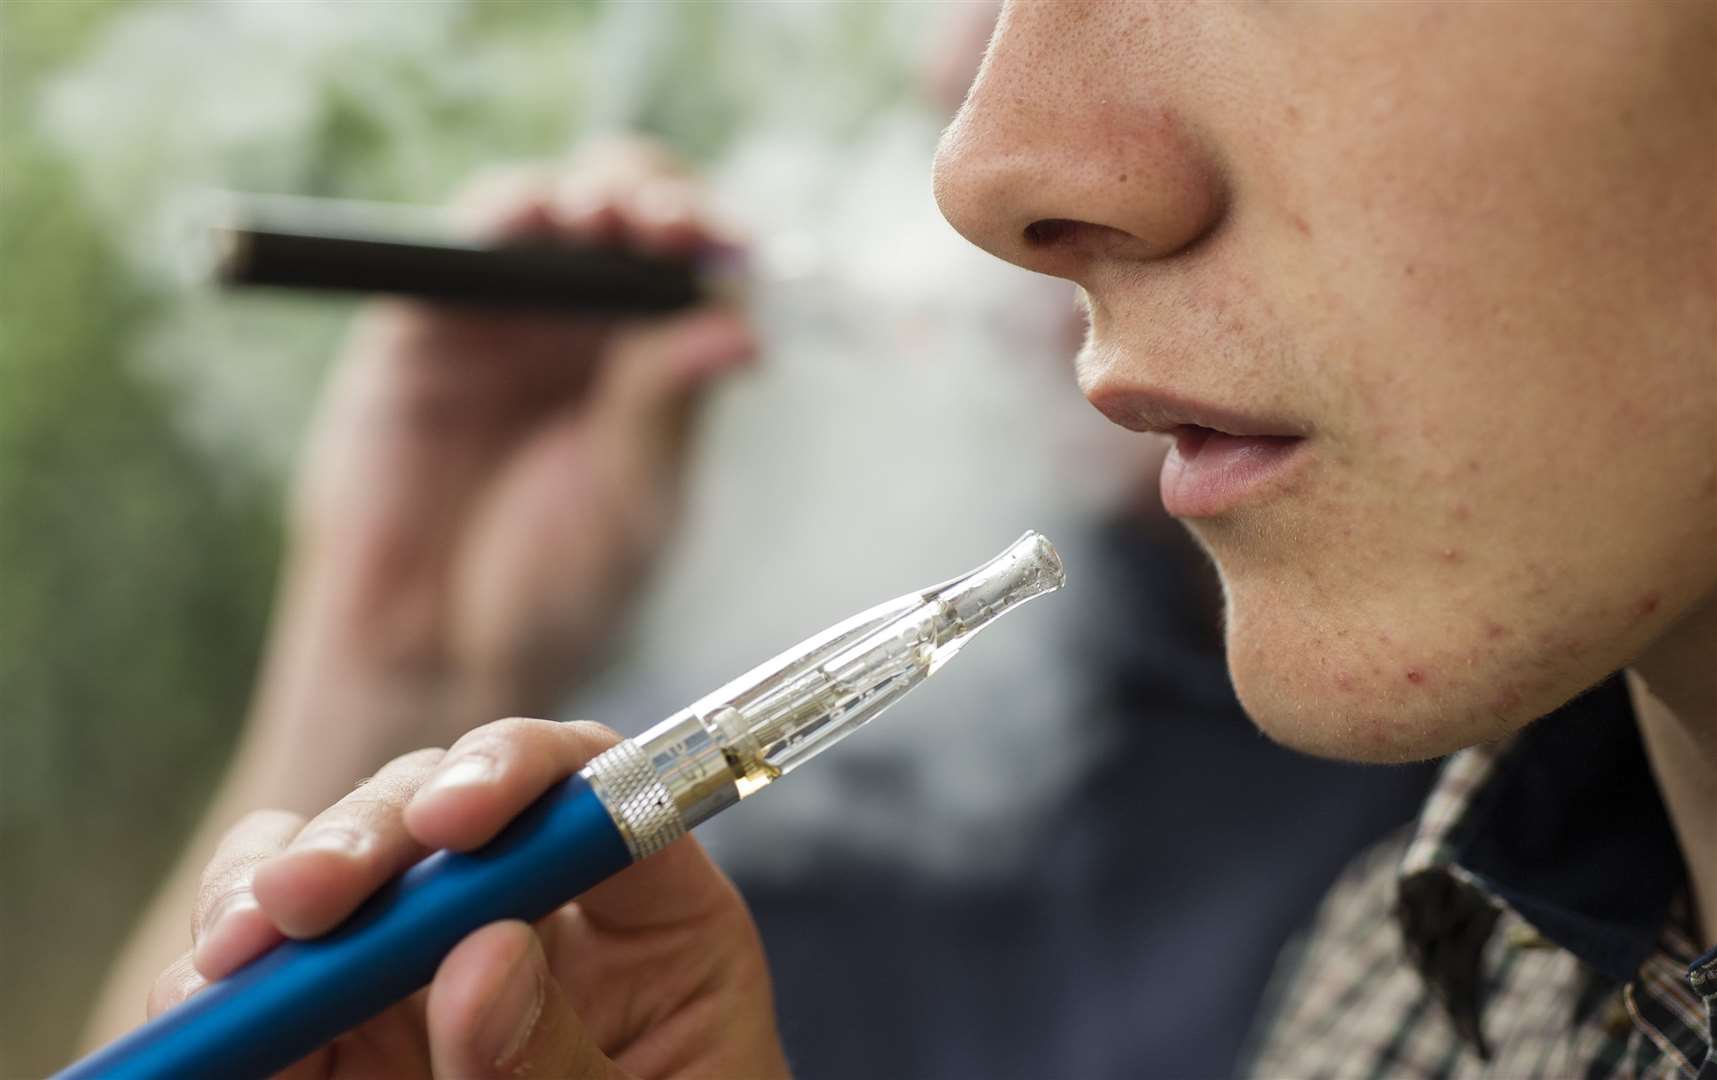 The 2021 survey on vape use among 15-year-olds, NHS Smoking Drinking and Drugs Use showed an increase in current and regular use - 18% reported using vapes, 10% regularly